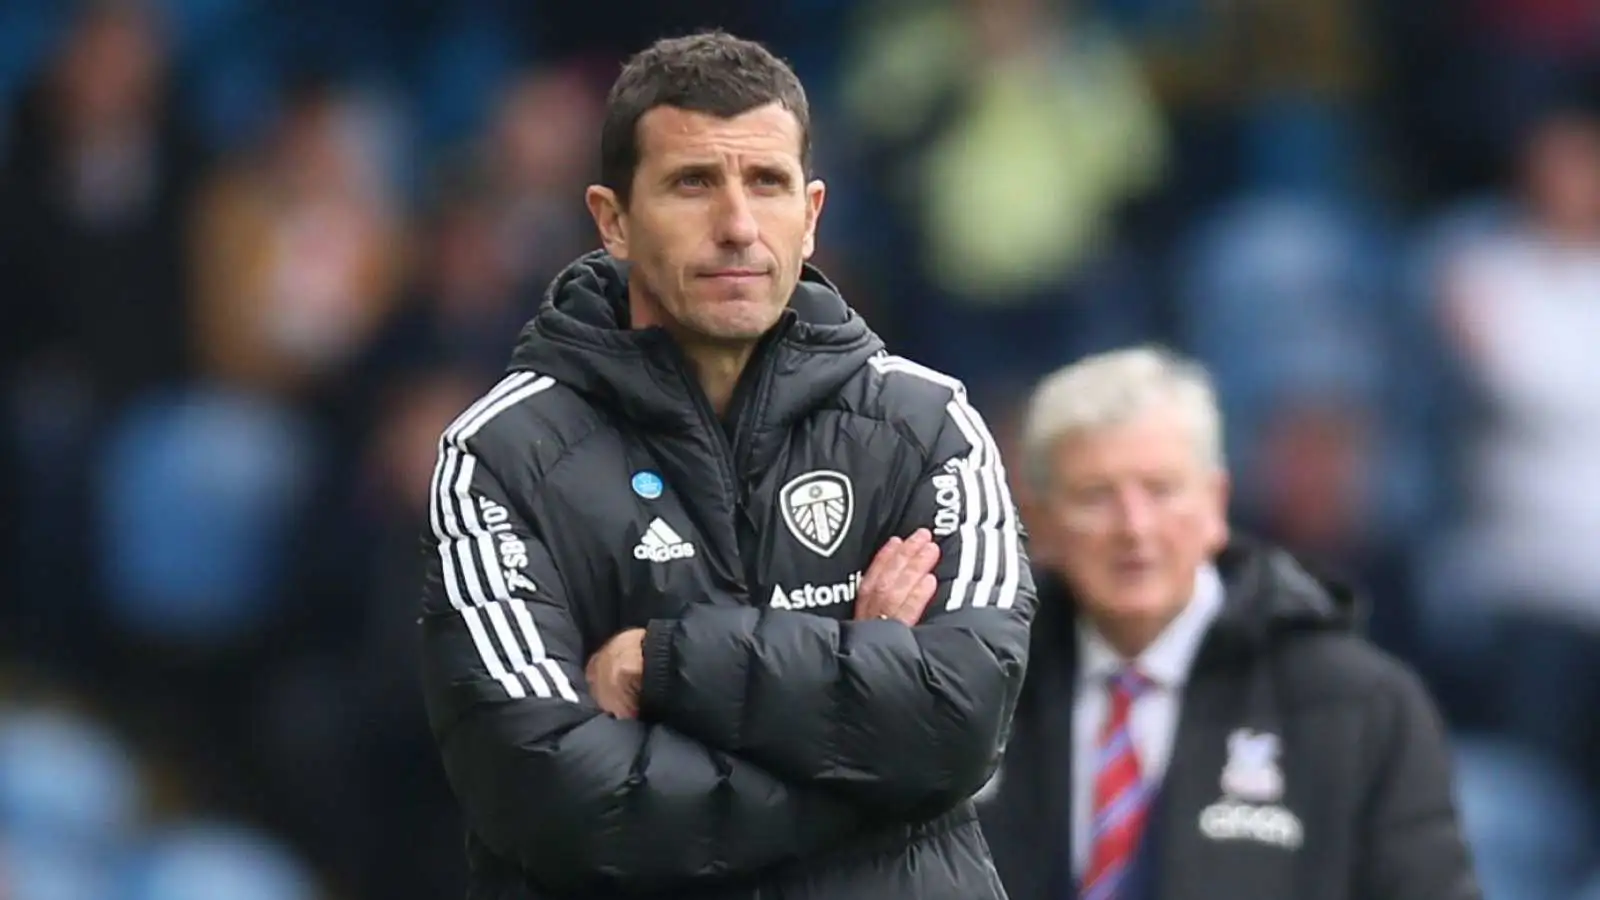 Javi Gracia calls Leeds United collapse against Crystal Palace ‘unbelievable’ before sharing unsuccessful half-time message